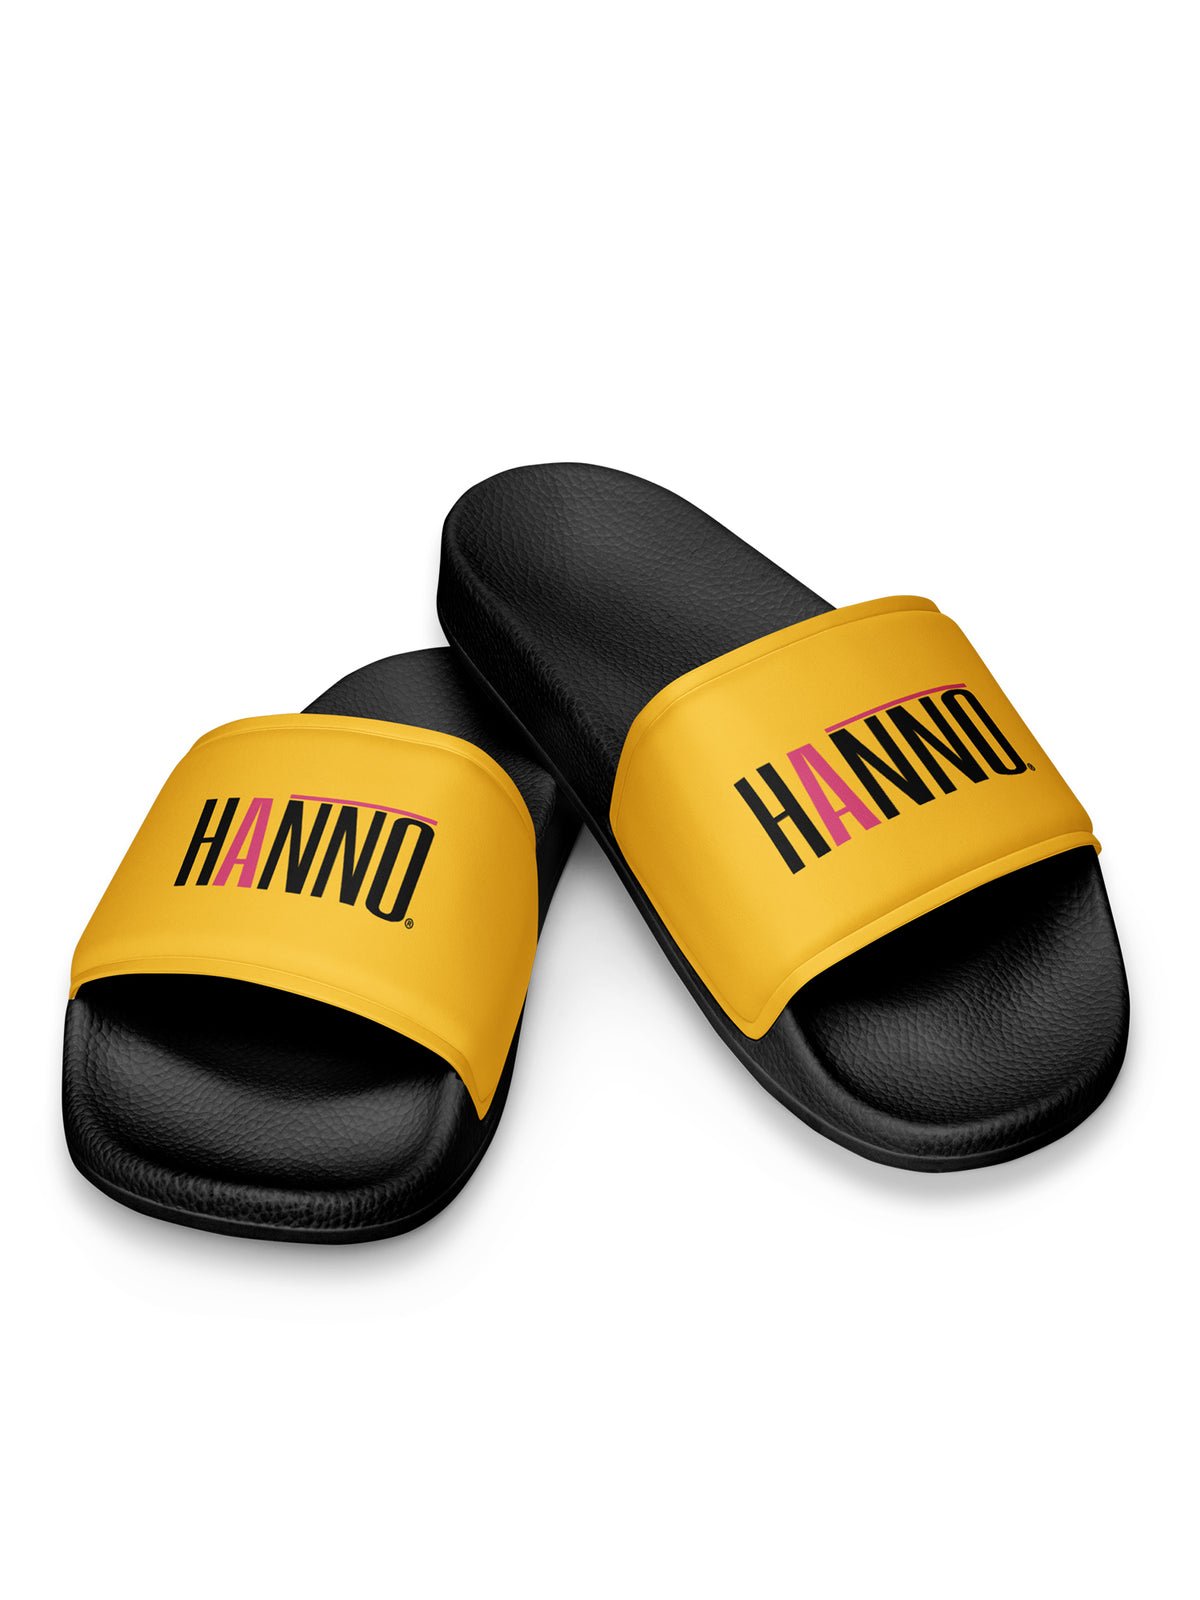 HANNO YELLOW SLIDES FOR HIM